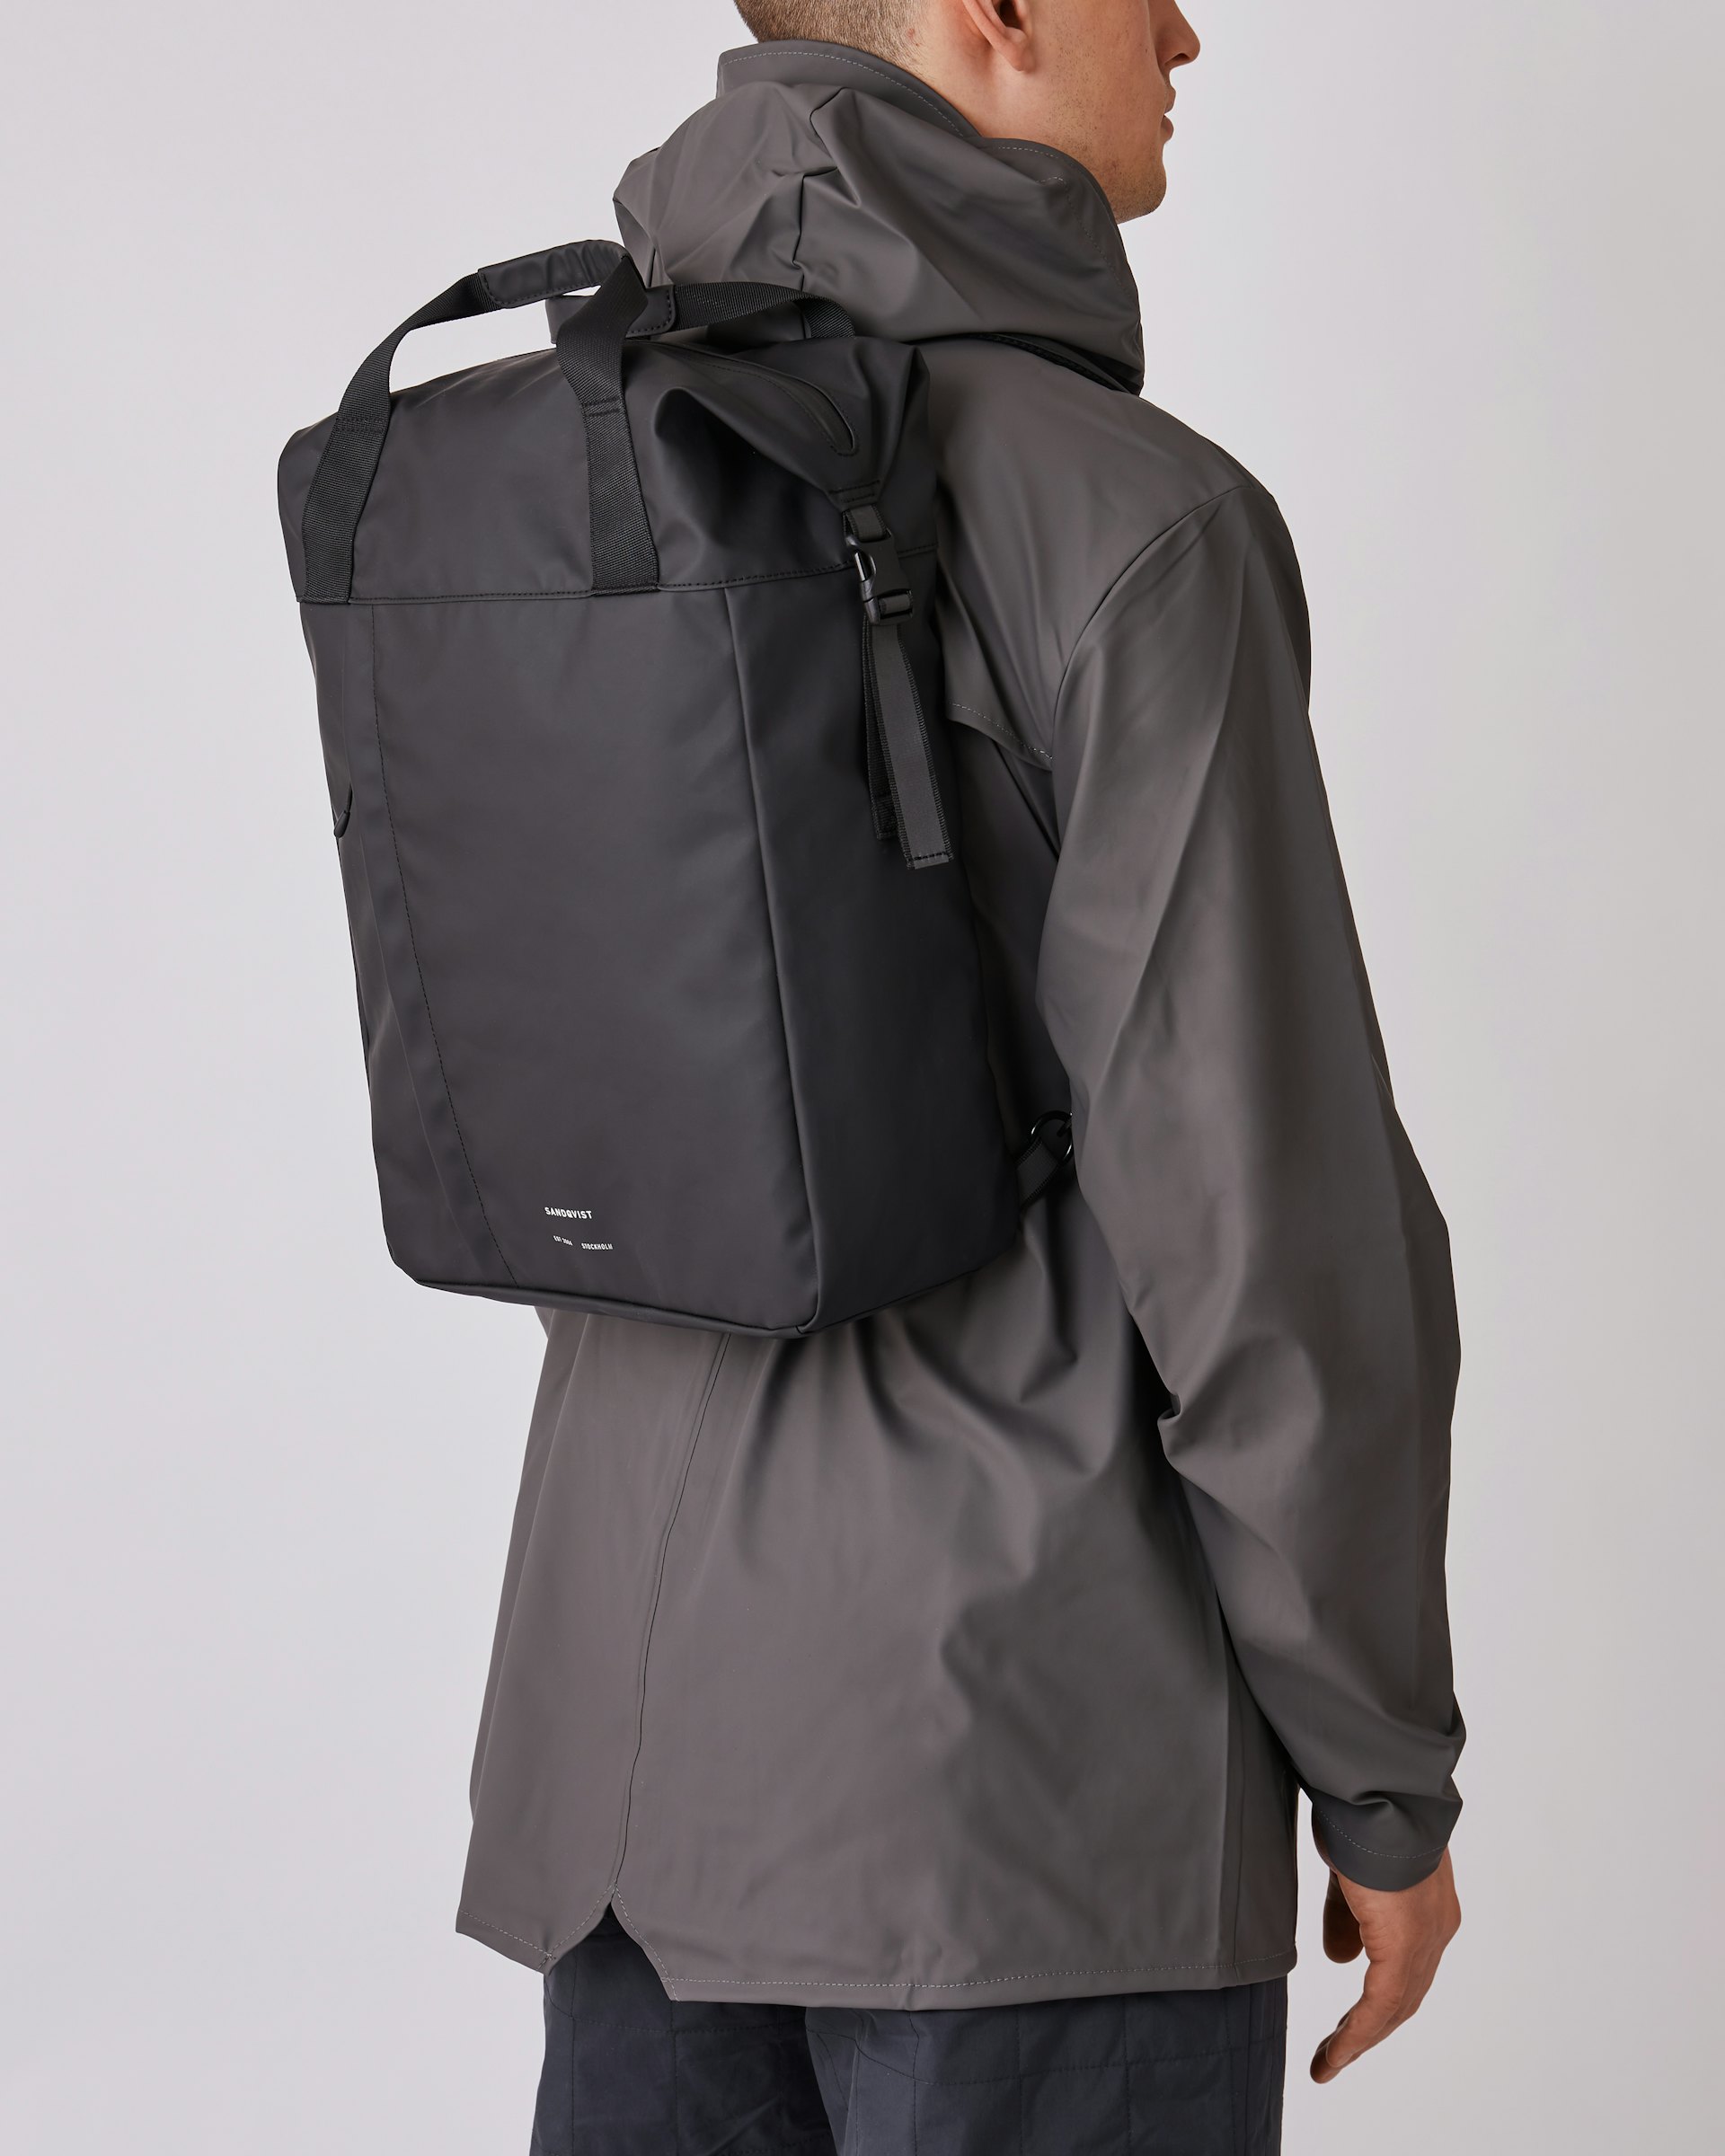 Atle belongs to the category Backpacks and is in color black (6 of 6)